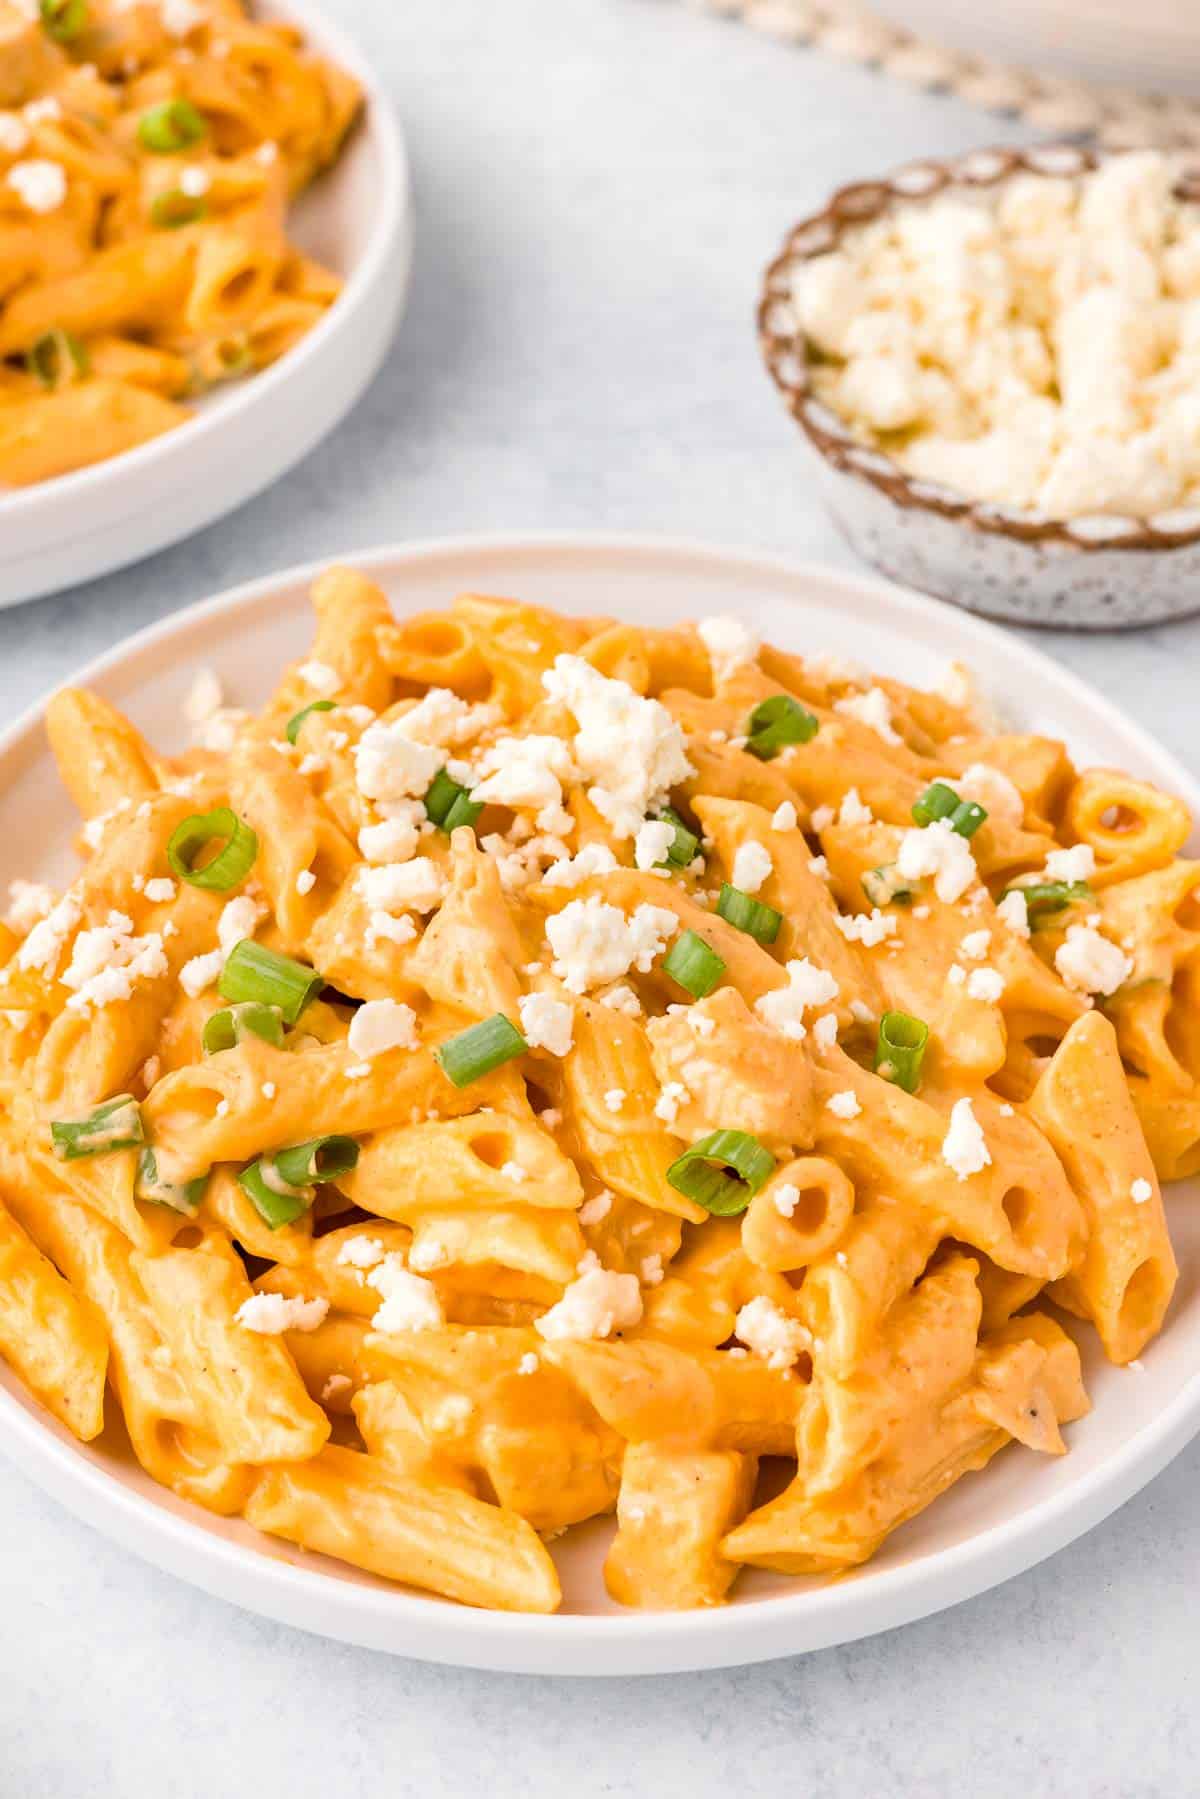 Buffalo Chicken Pasta topped with feta cheese crumbles